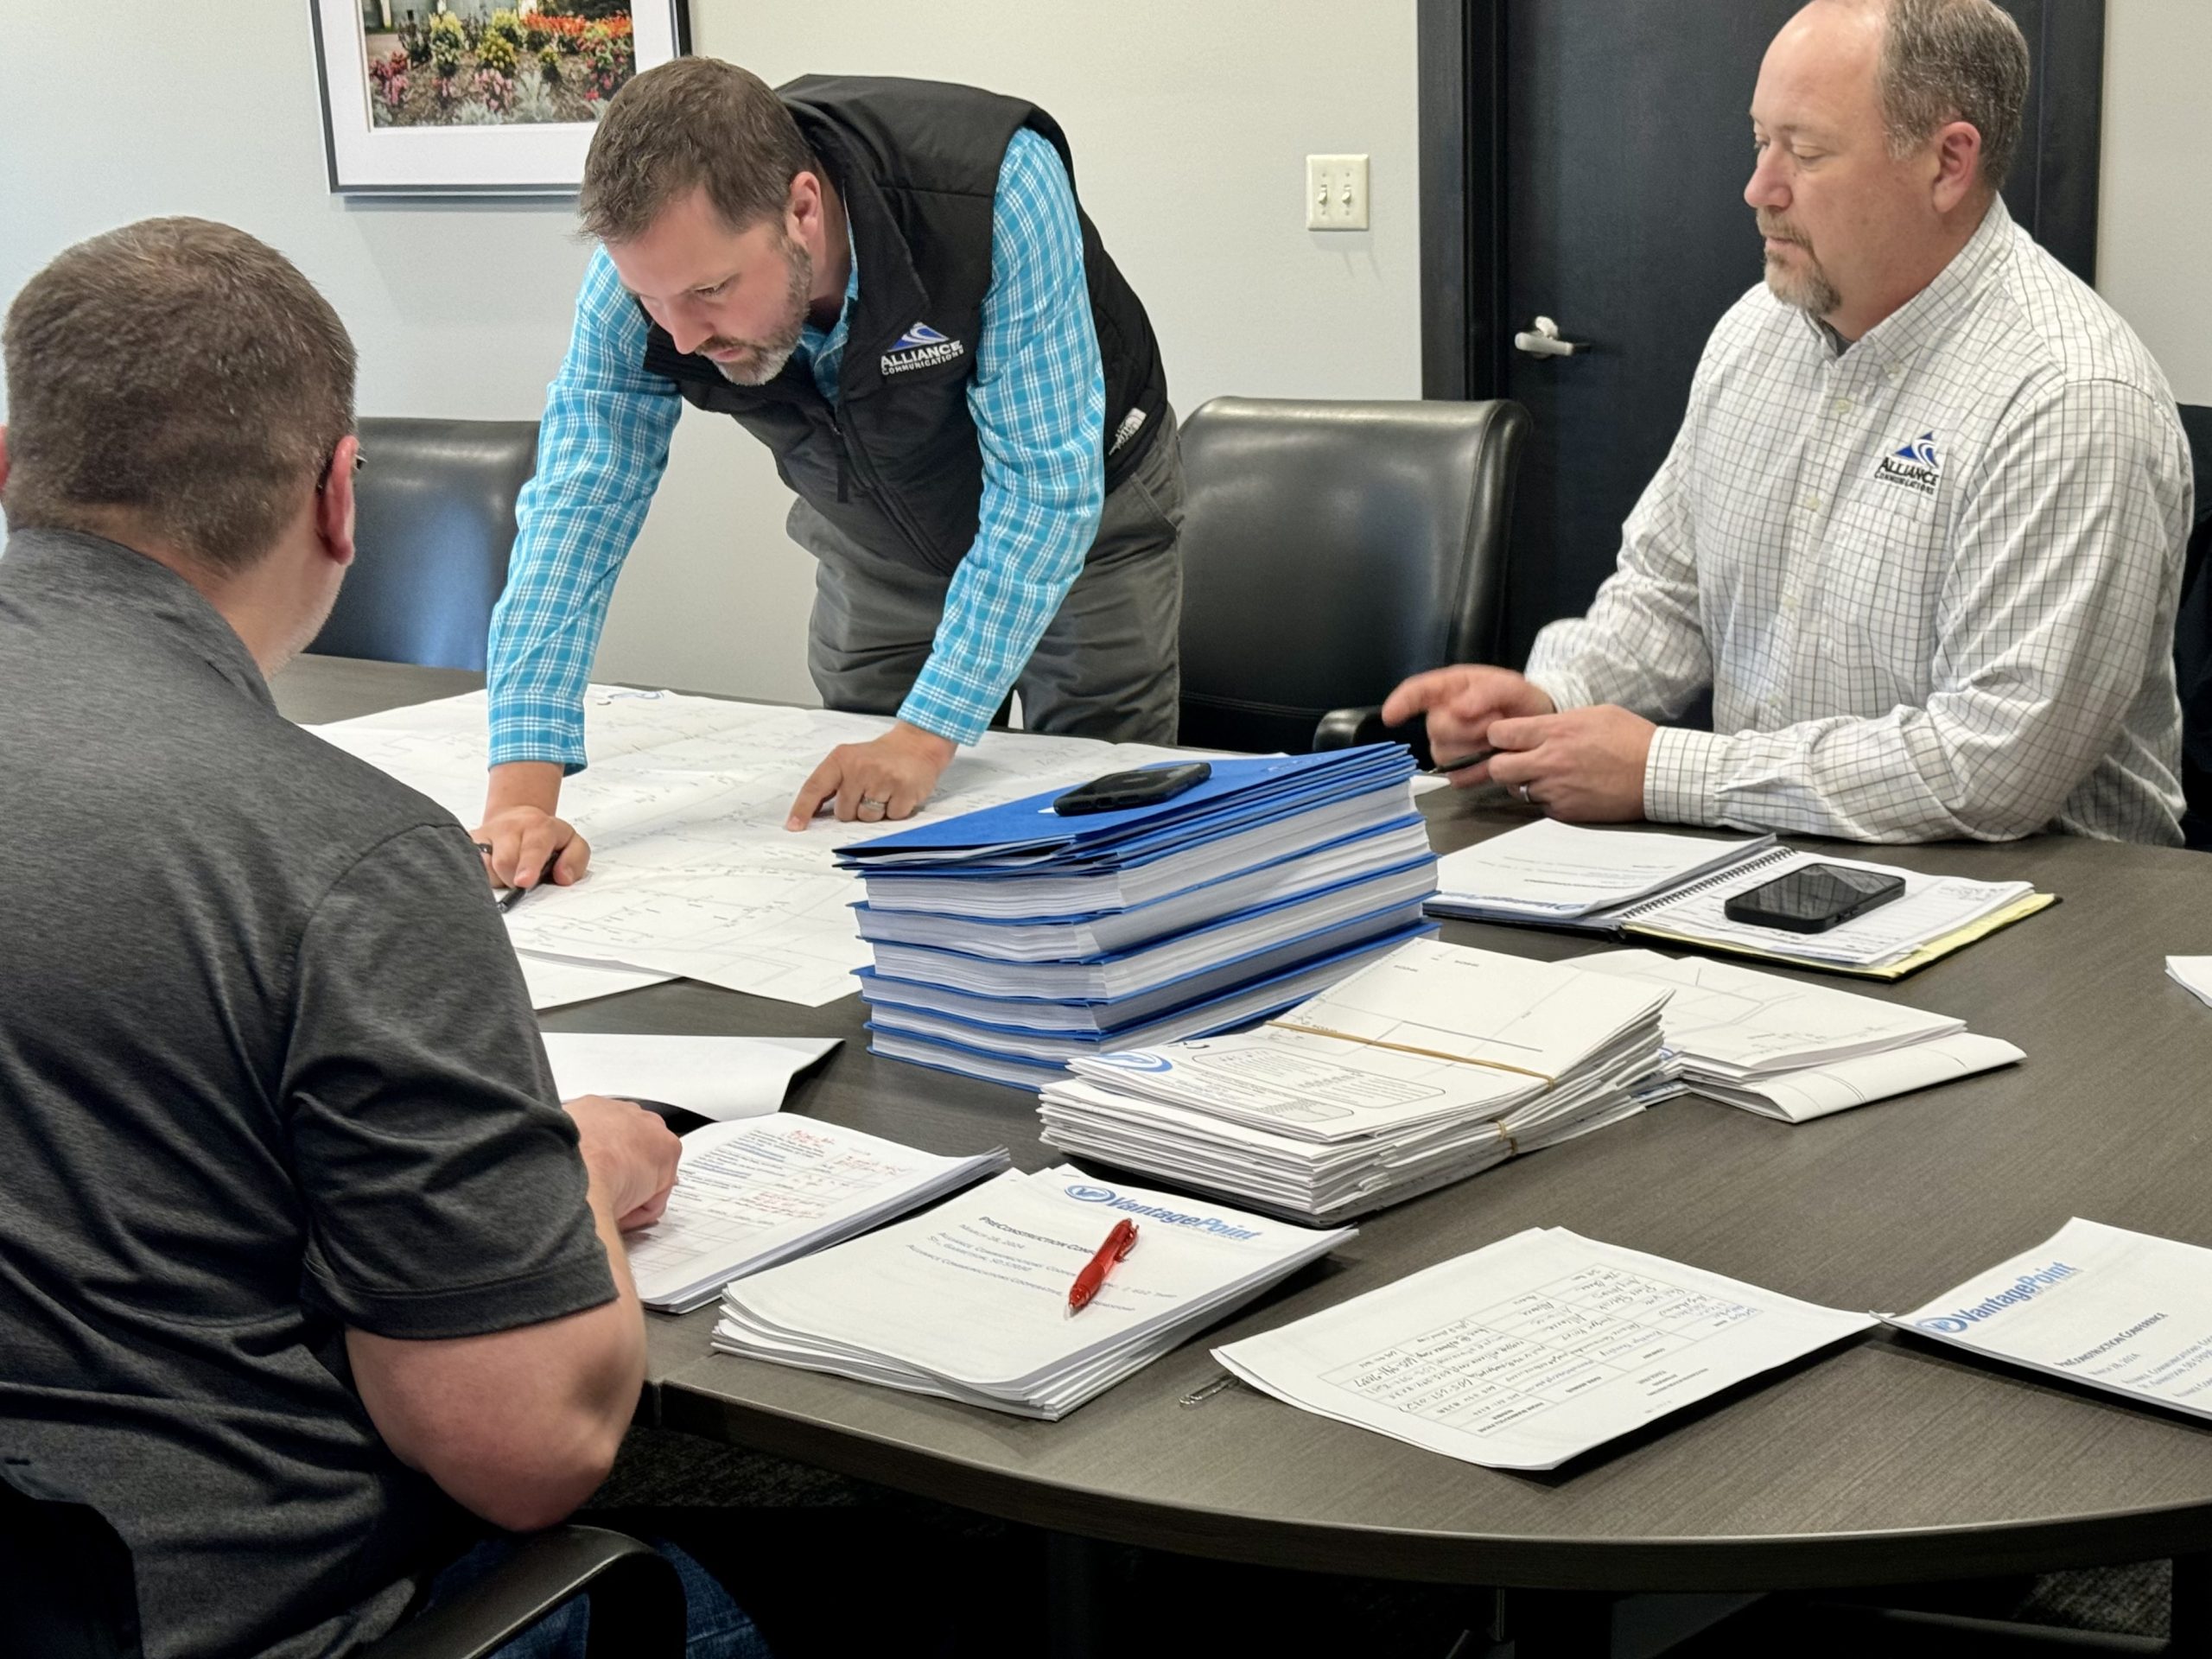 Alliance CEO Ross Petrick and COO Andy Hulscher review construction maps for rural Beresford's new fiber network.